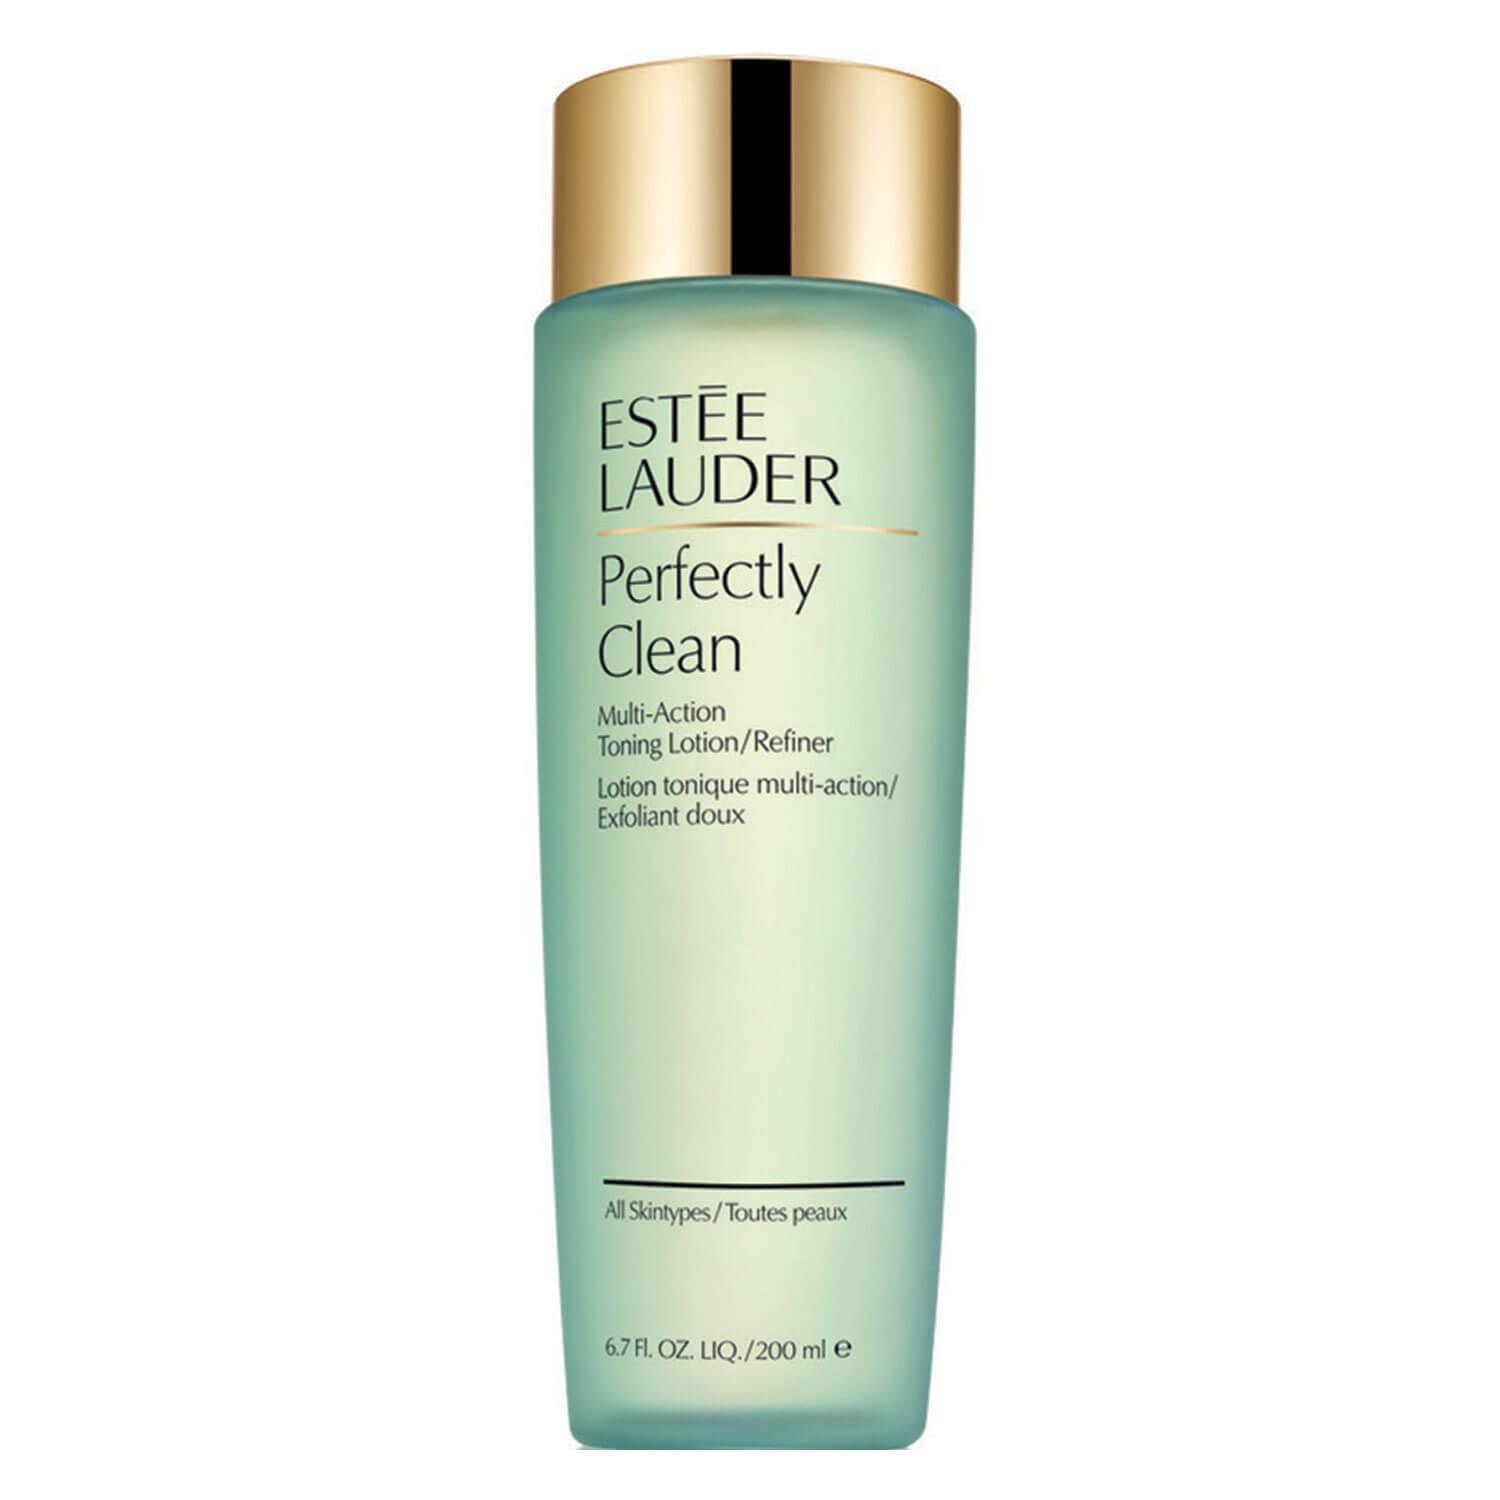 Perfectly Clean - Multi-Action Toning Lotion/Refiner